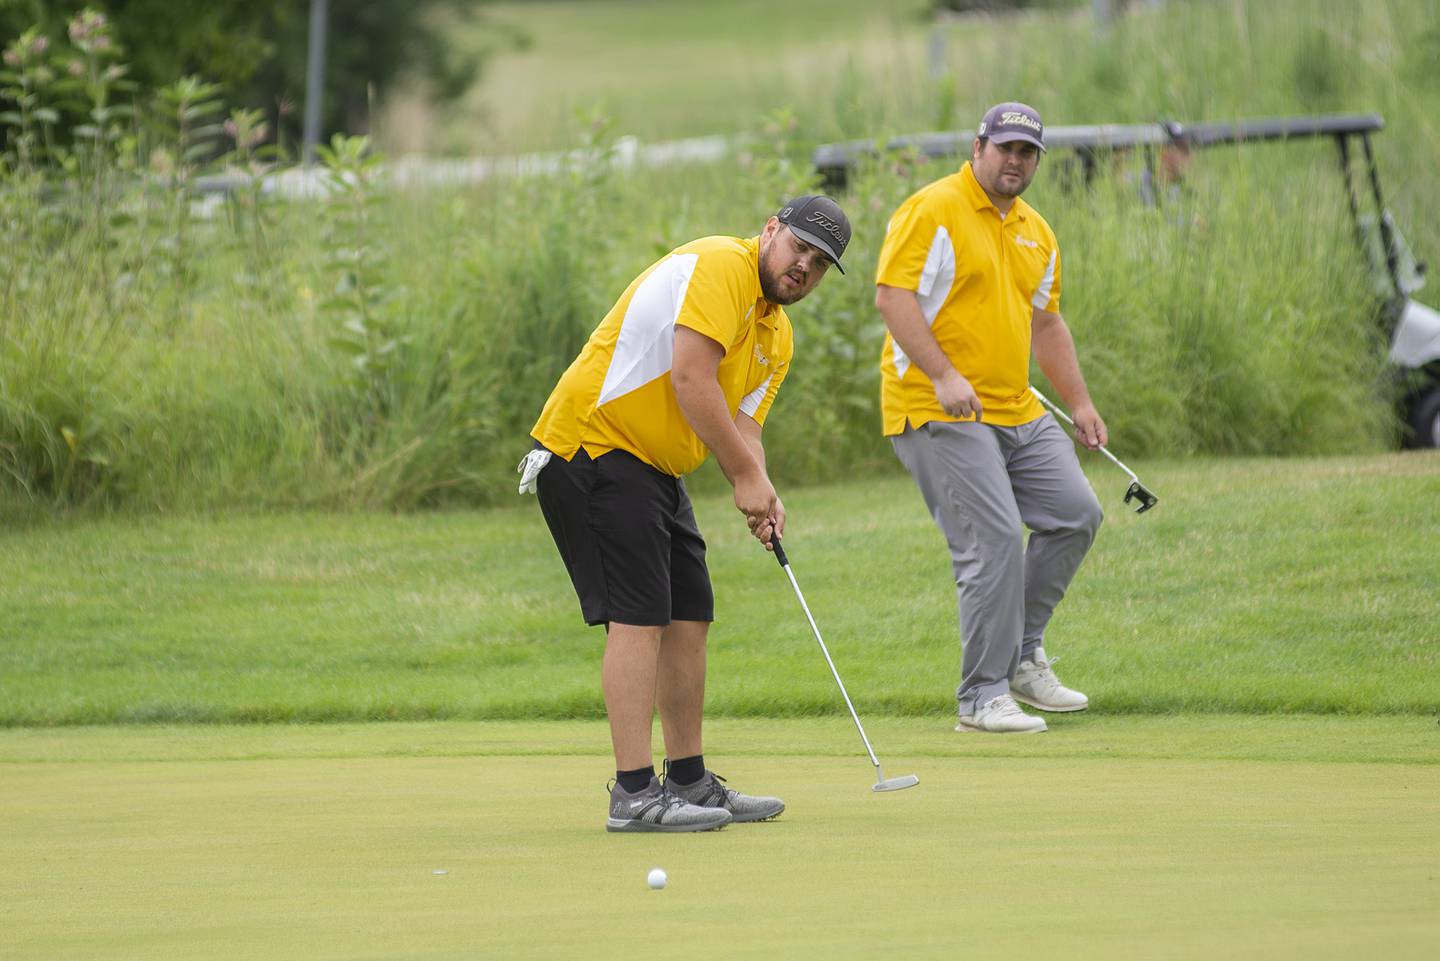 Trevor Sisson putts the #10 tee off in the second round on Sunday July 17, 2022 of the Lincoln Highway Golf Tournament at Prairie View Golf Club in Byron.